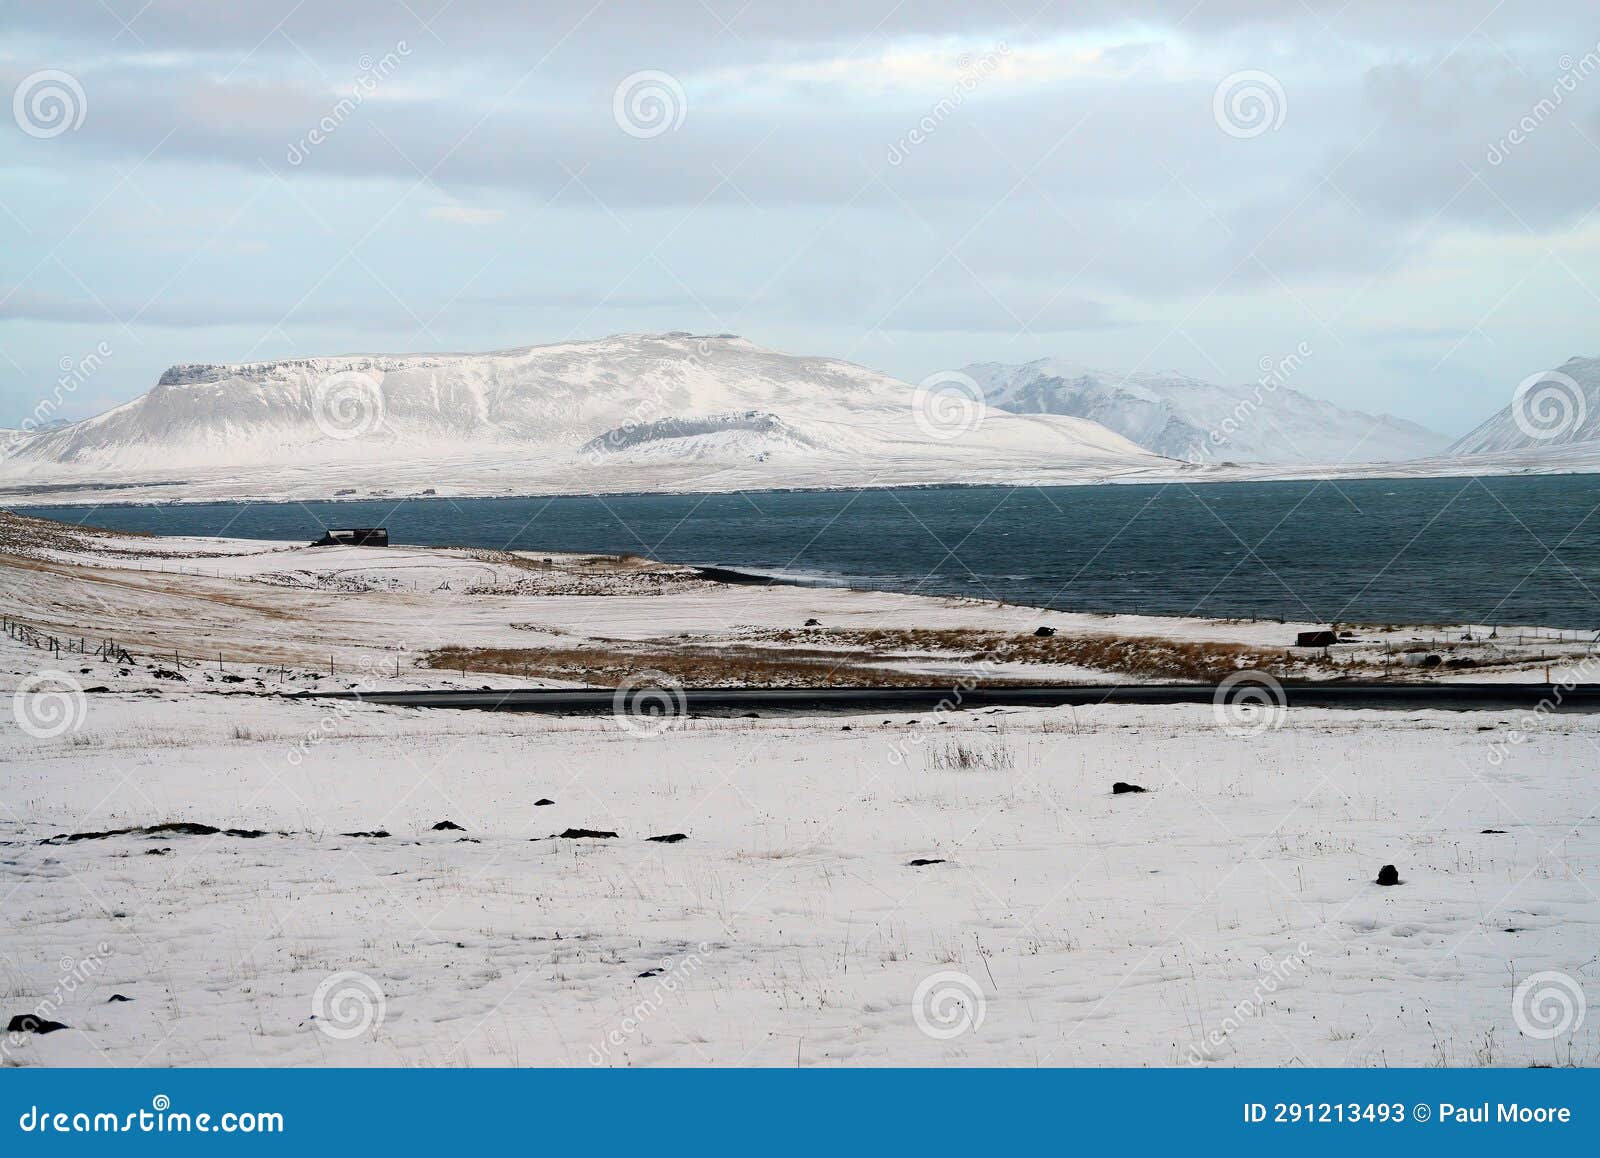 The Snowy Highlands Of Iceland In Winter Stock Image Image Of